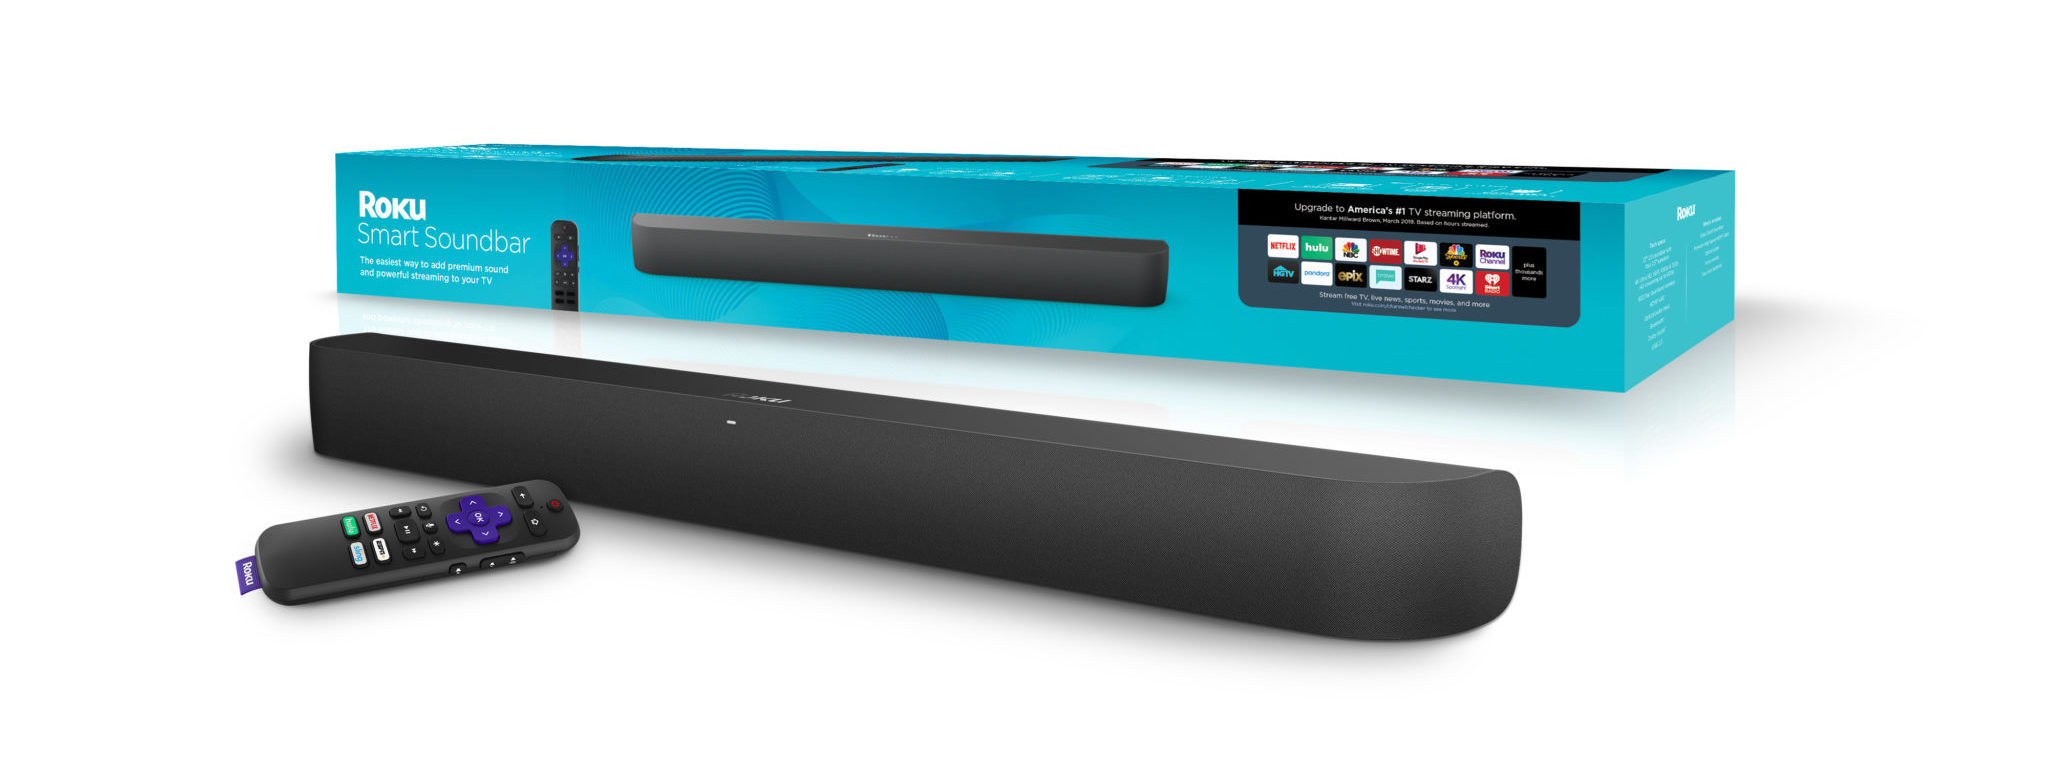 Roku is Offering $20 Off Their Smart Soundbar (Limited Time, Ends 2/1/2020)